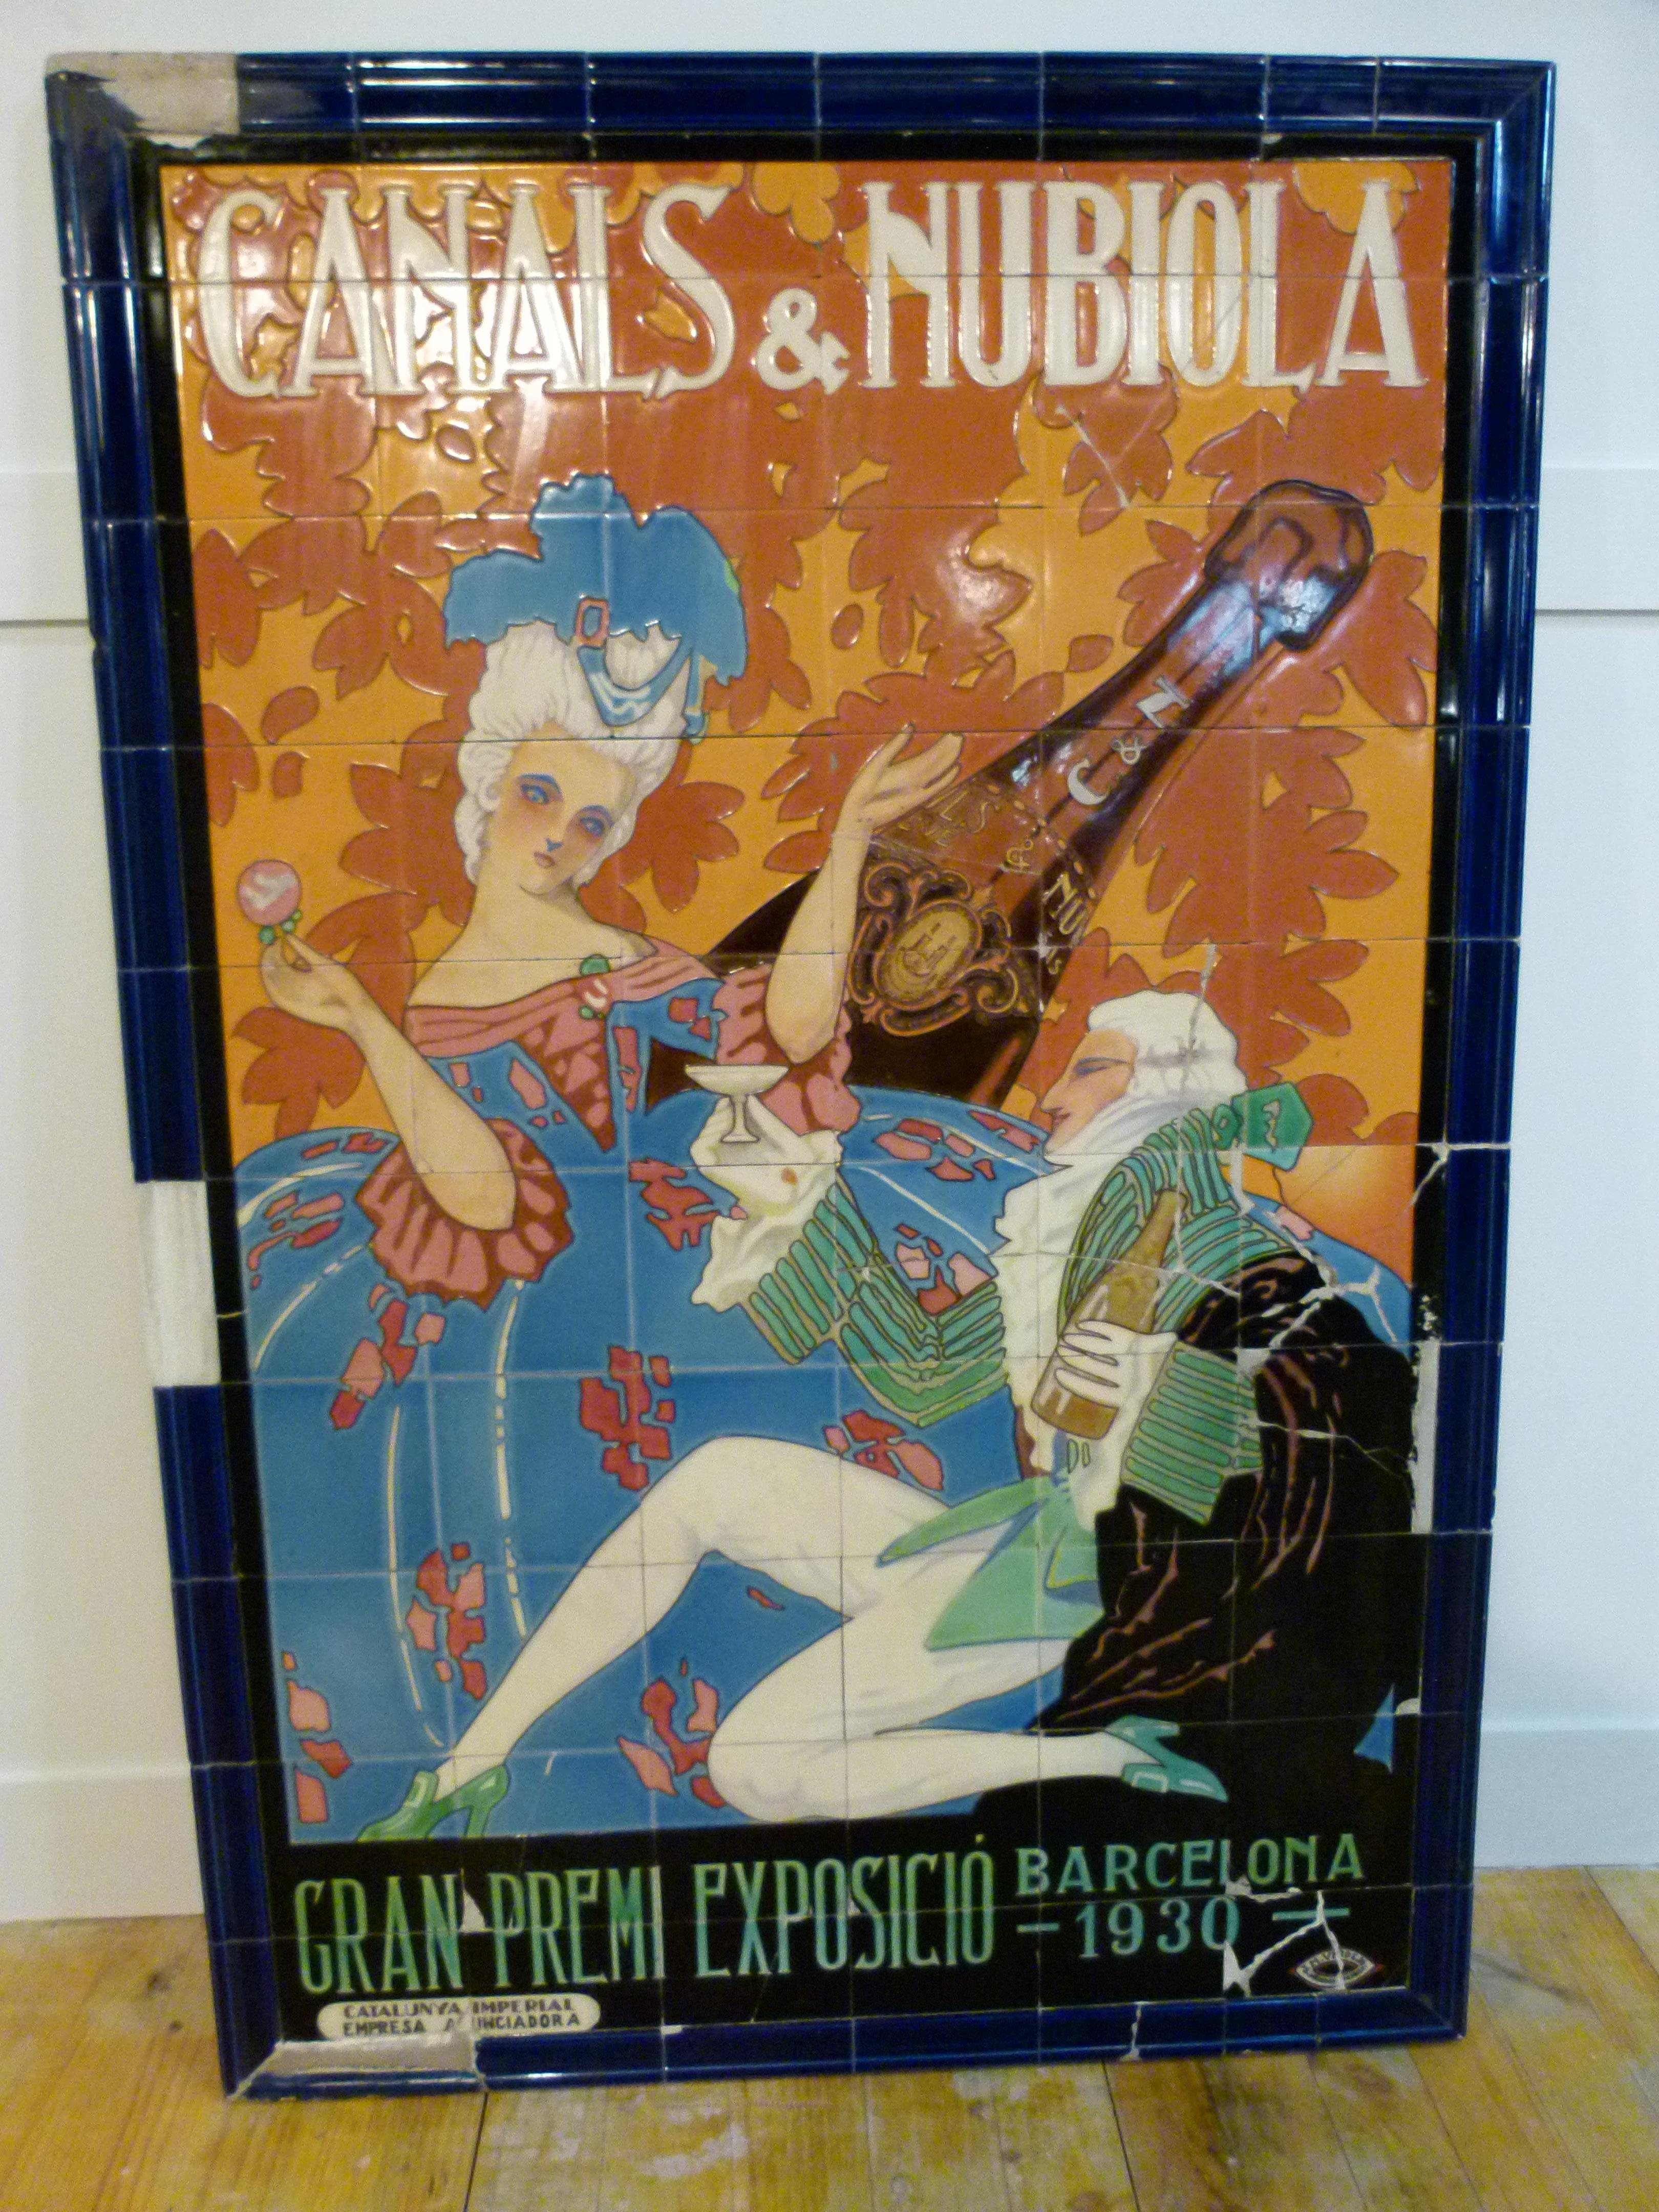 Art Nouveau Advertising Tile Poster from Canals&Nubiola's Wine Cellar 
This Advertising tile poster won the firts prize in the International Exhibition in Barcelona 1930. 
 
